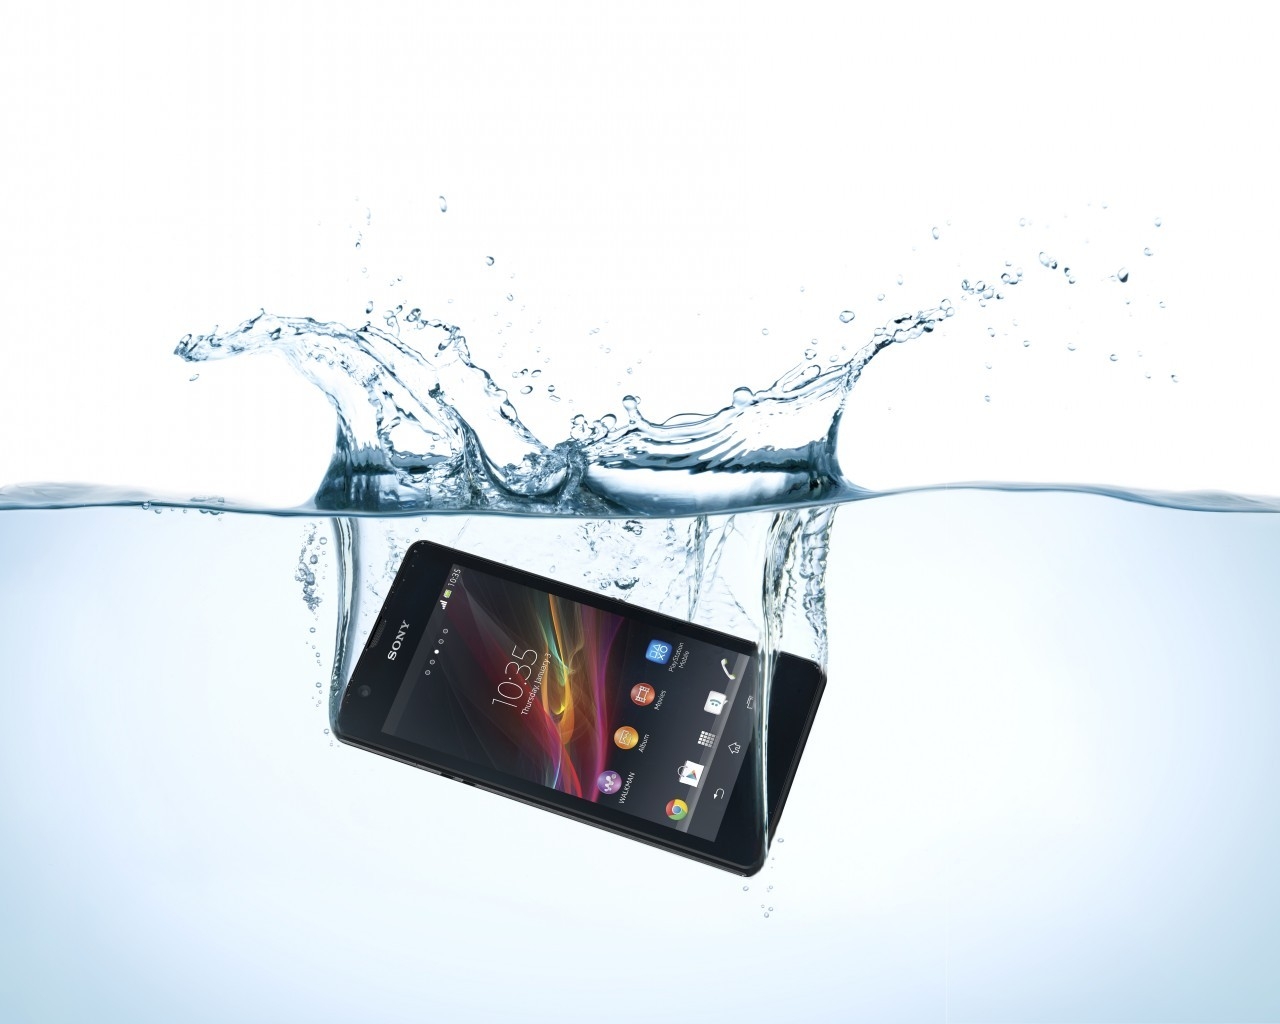 Sony Xperia Swimming for 1280 x 1024 resolution